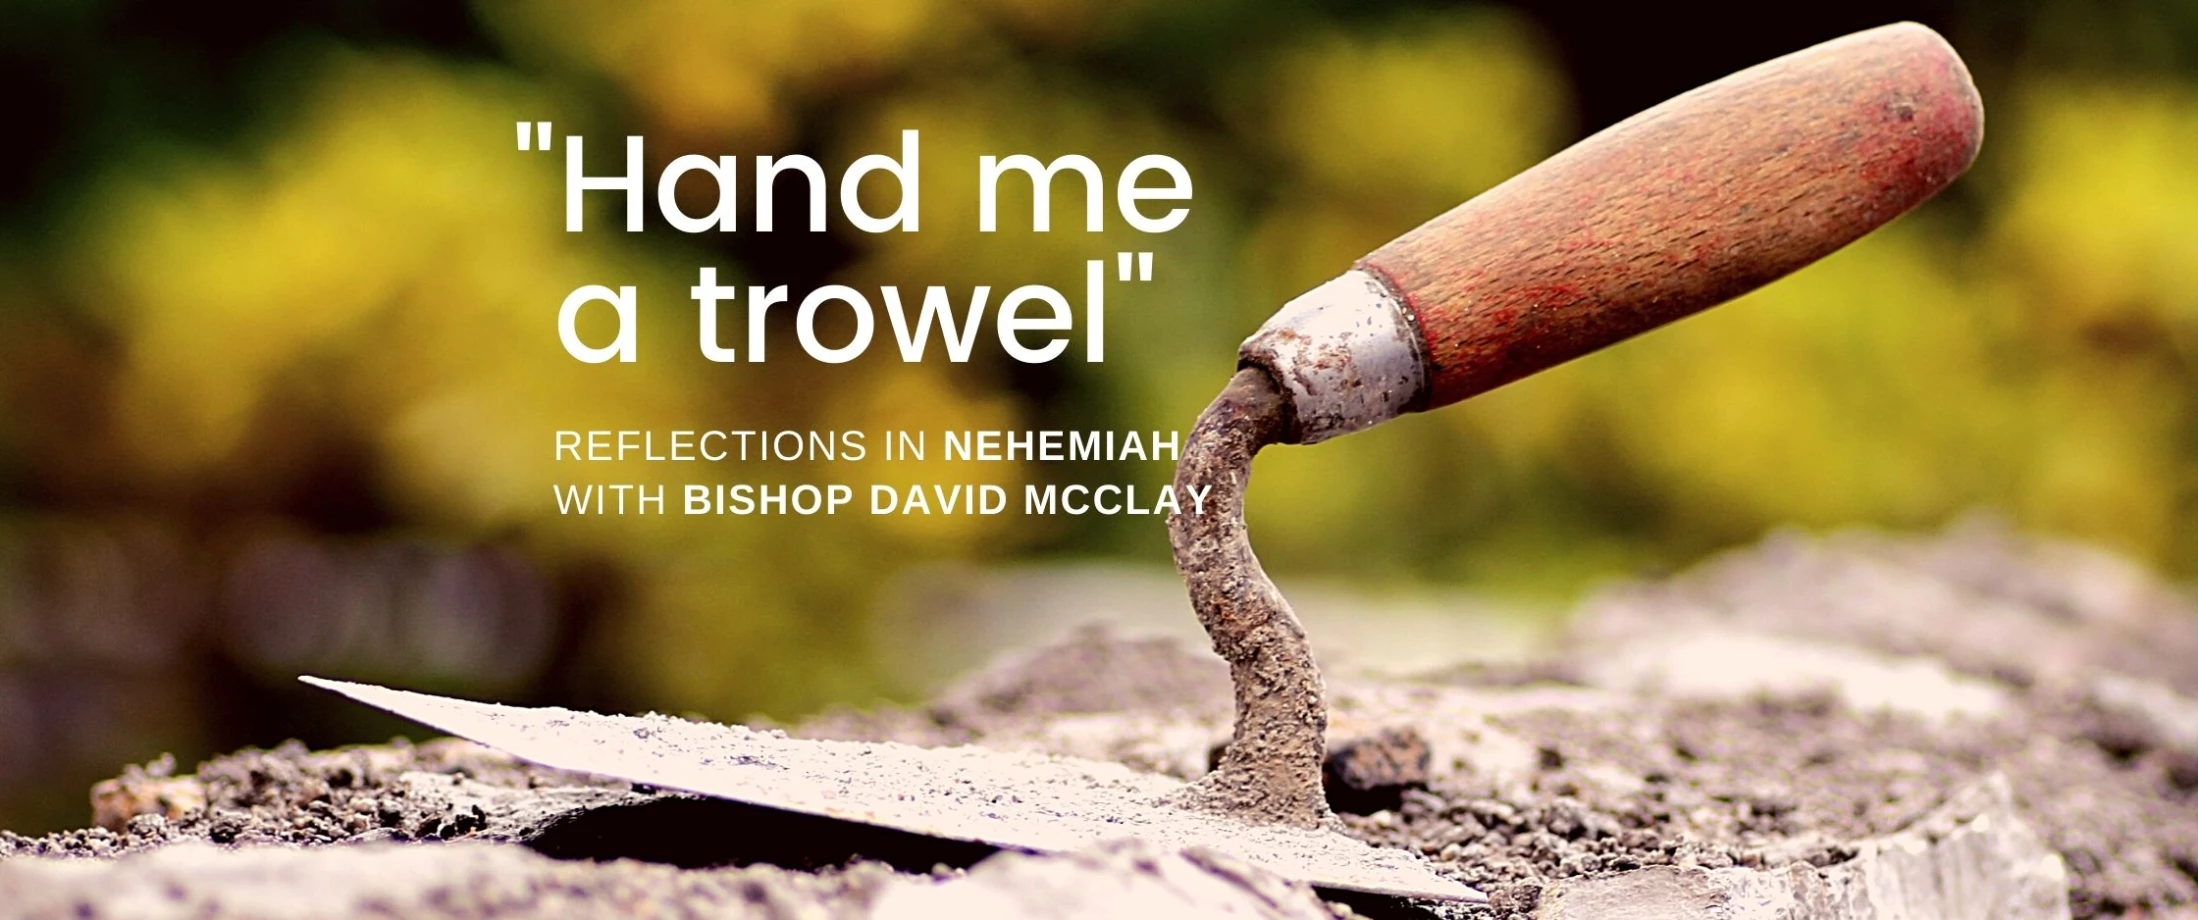 Reflections in Nehemiah for Lent Day 20